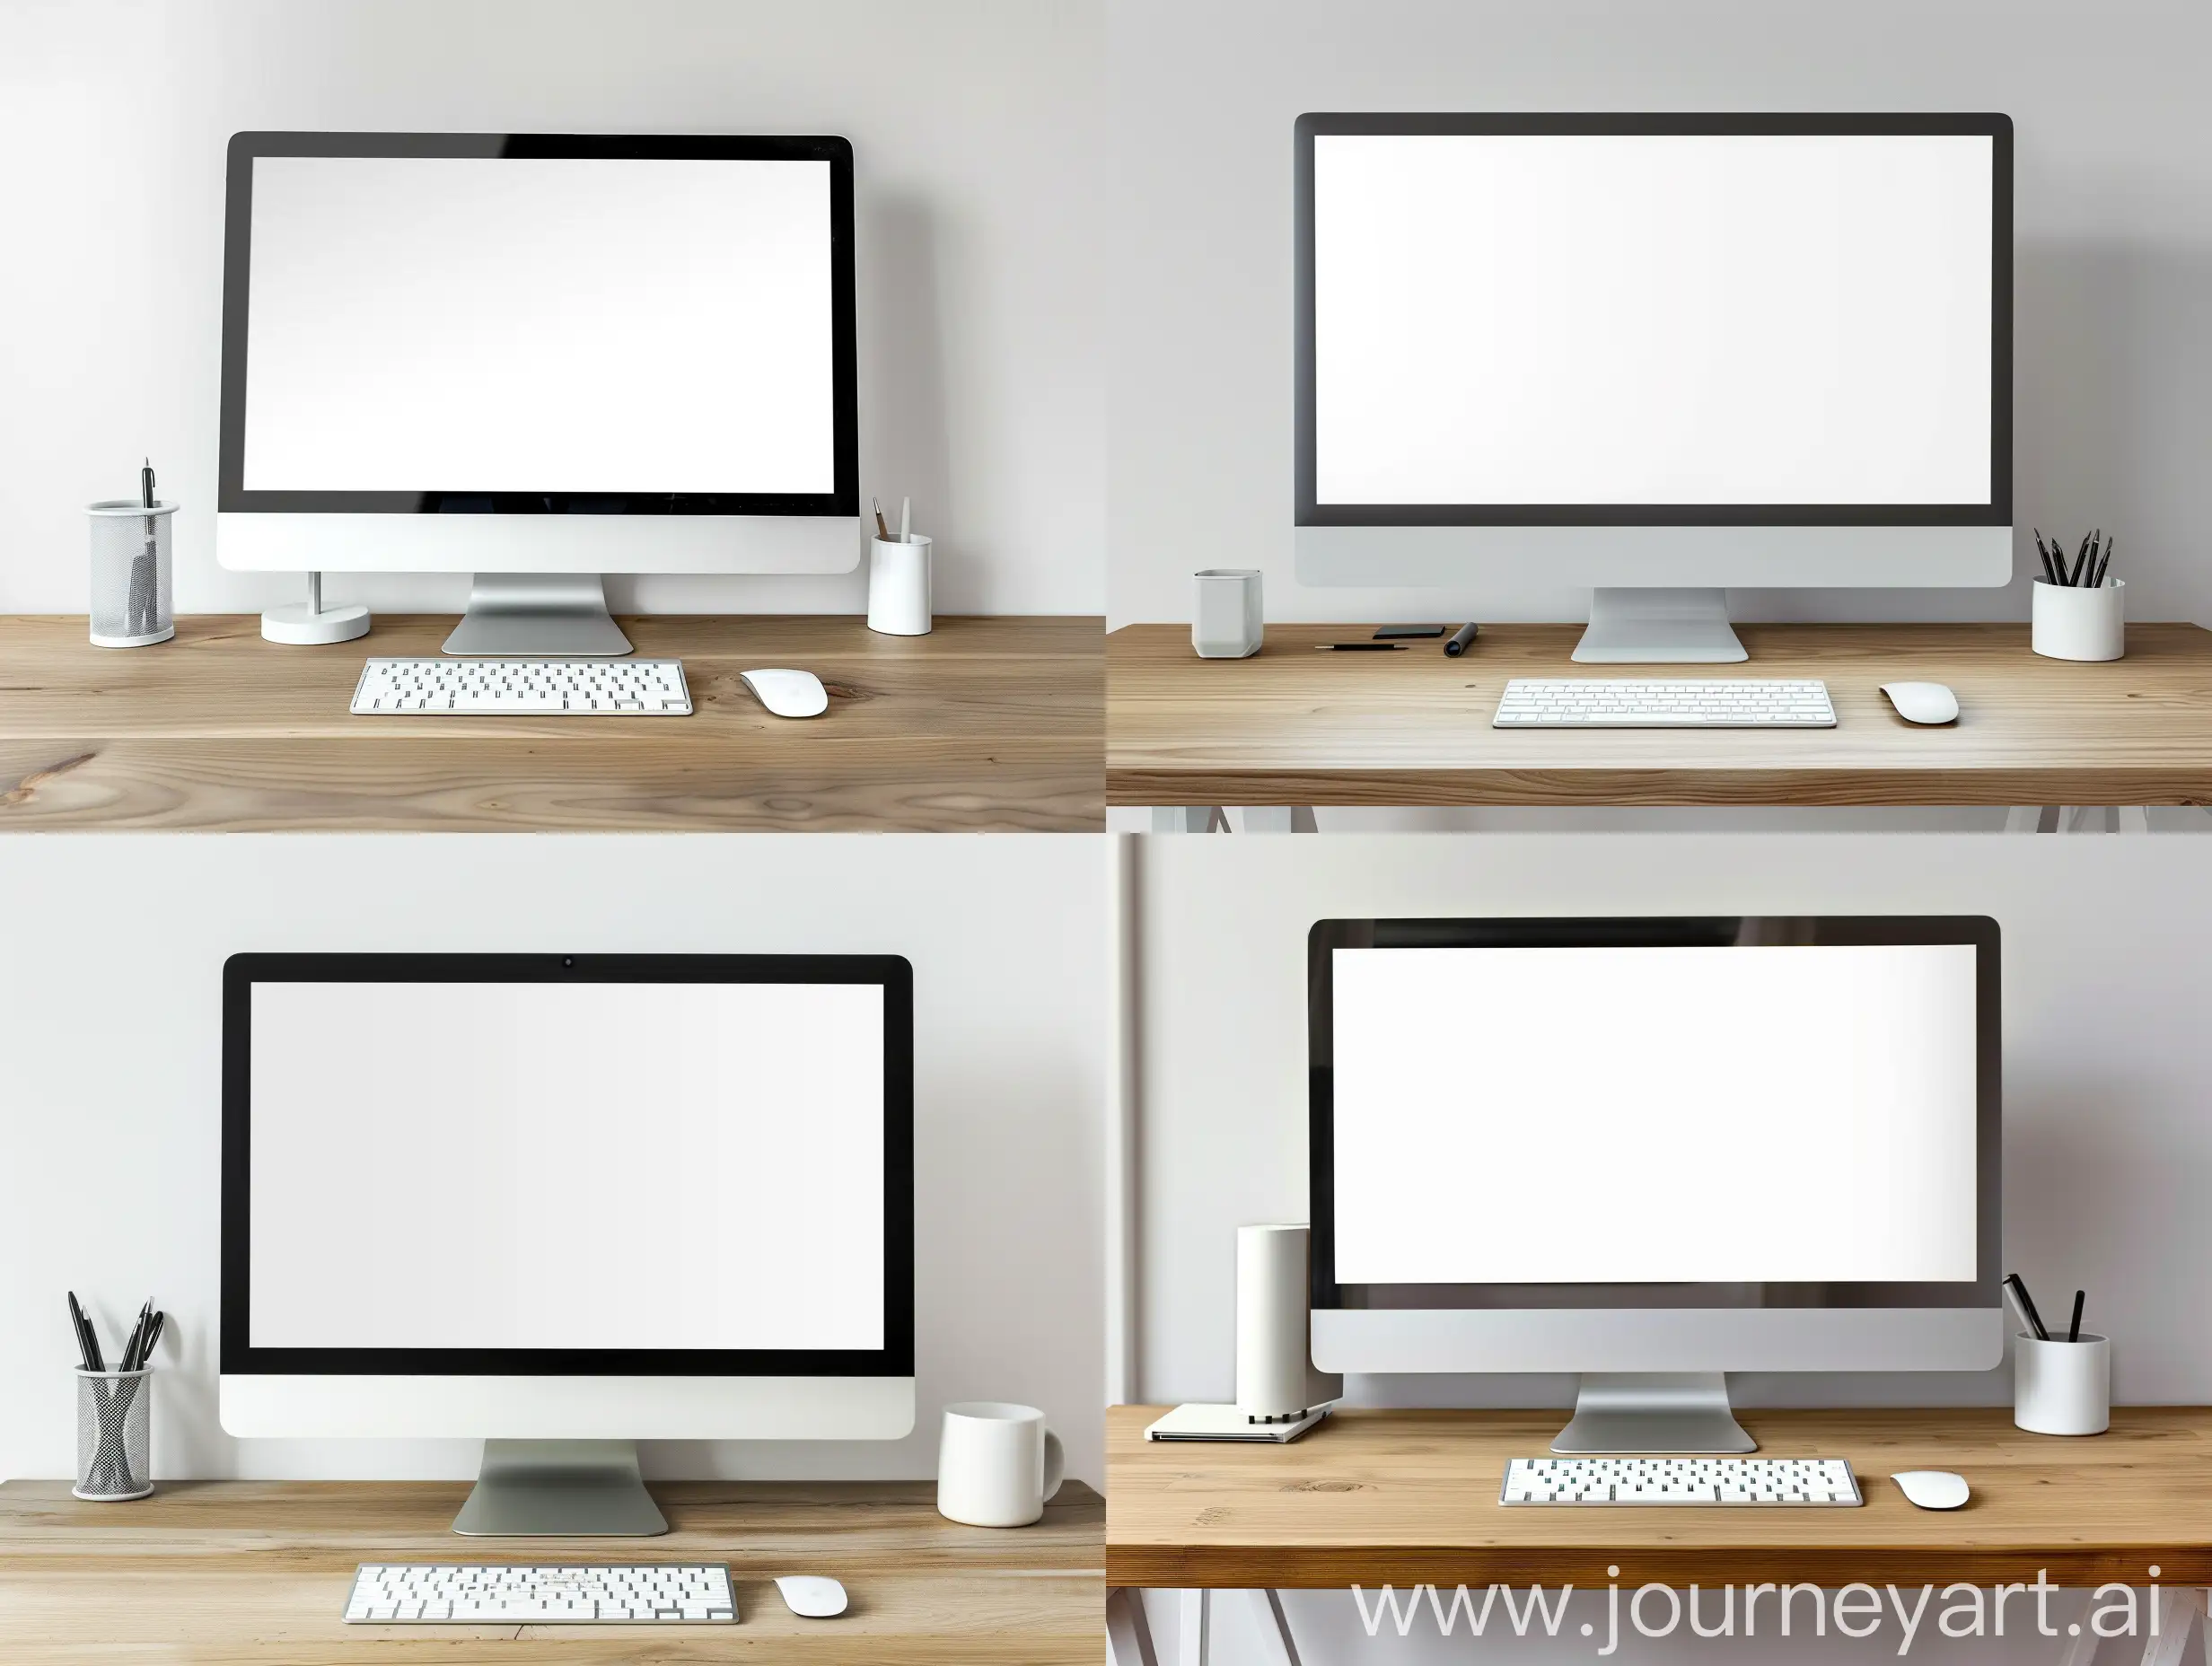 A minimalist white workspace. A wooden desk, sits center stage. we see a modern computer monitor with a blank, inviting screen. details like a sleek wireless keyboard, and a minimalist pen holder with a single pen hint at a focused and organized mind. The overall atmosphere is one of quiet productivity, modern and minimal elegance; focus on the screen; front-angle view